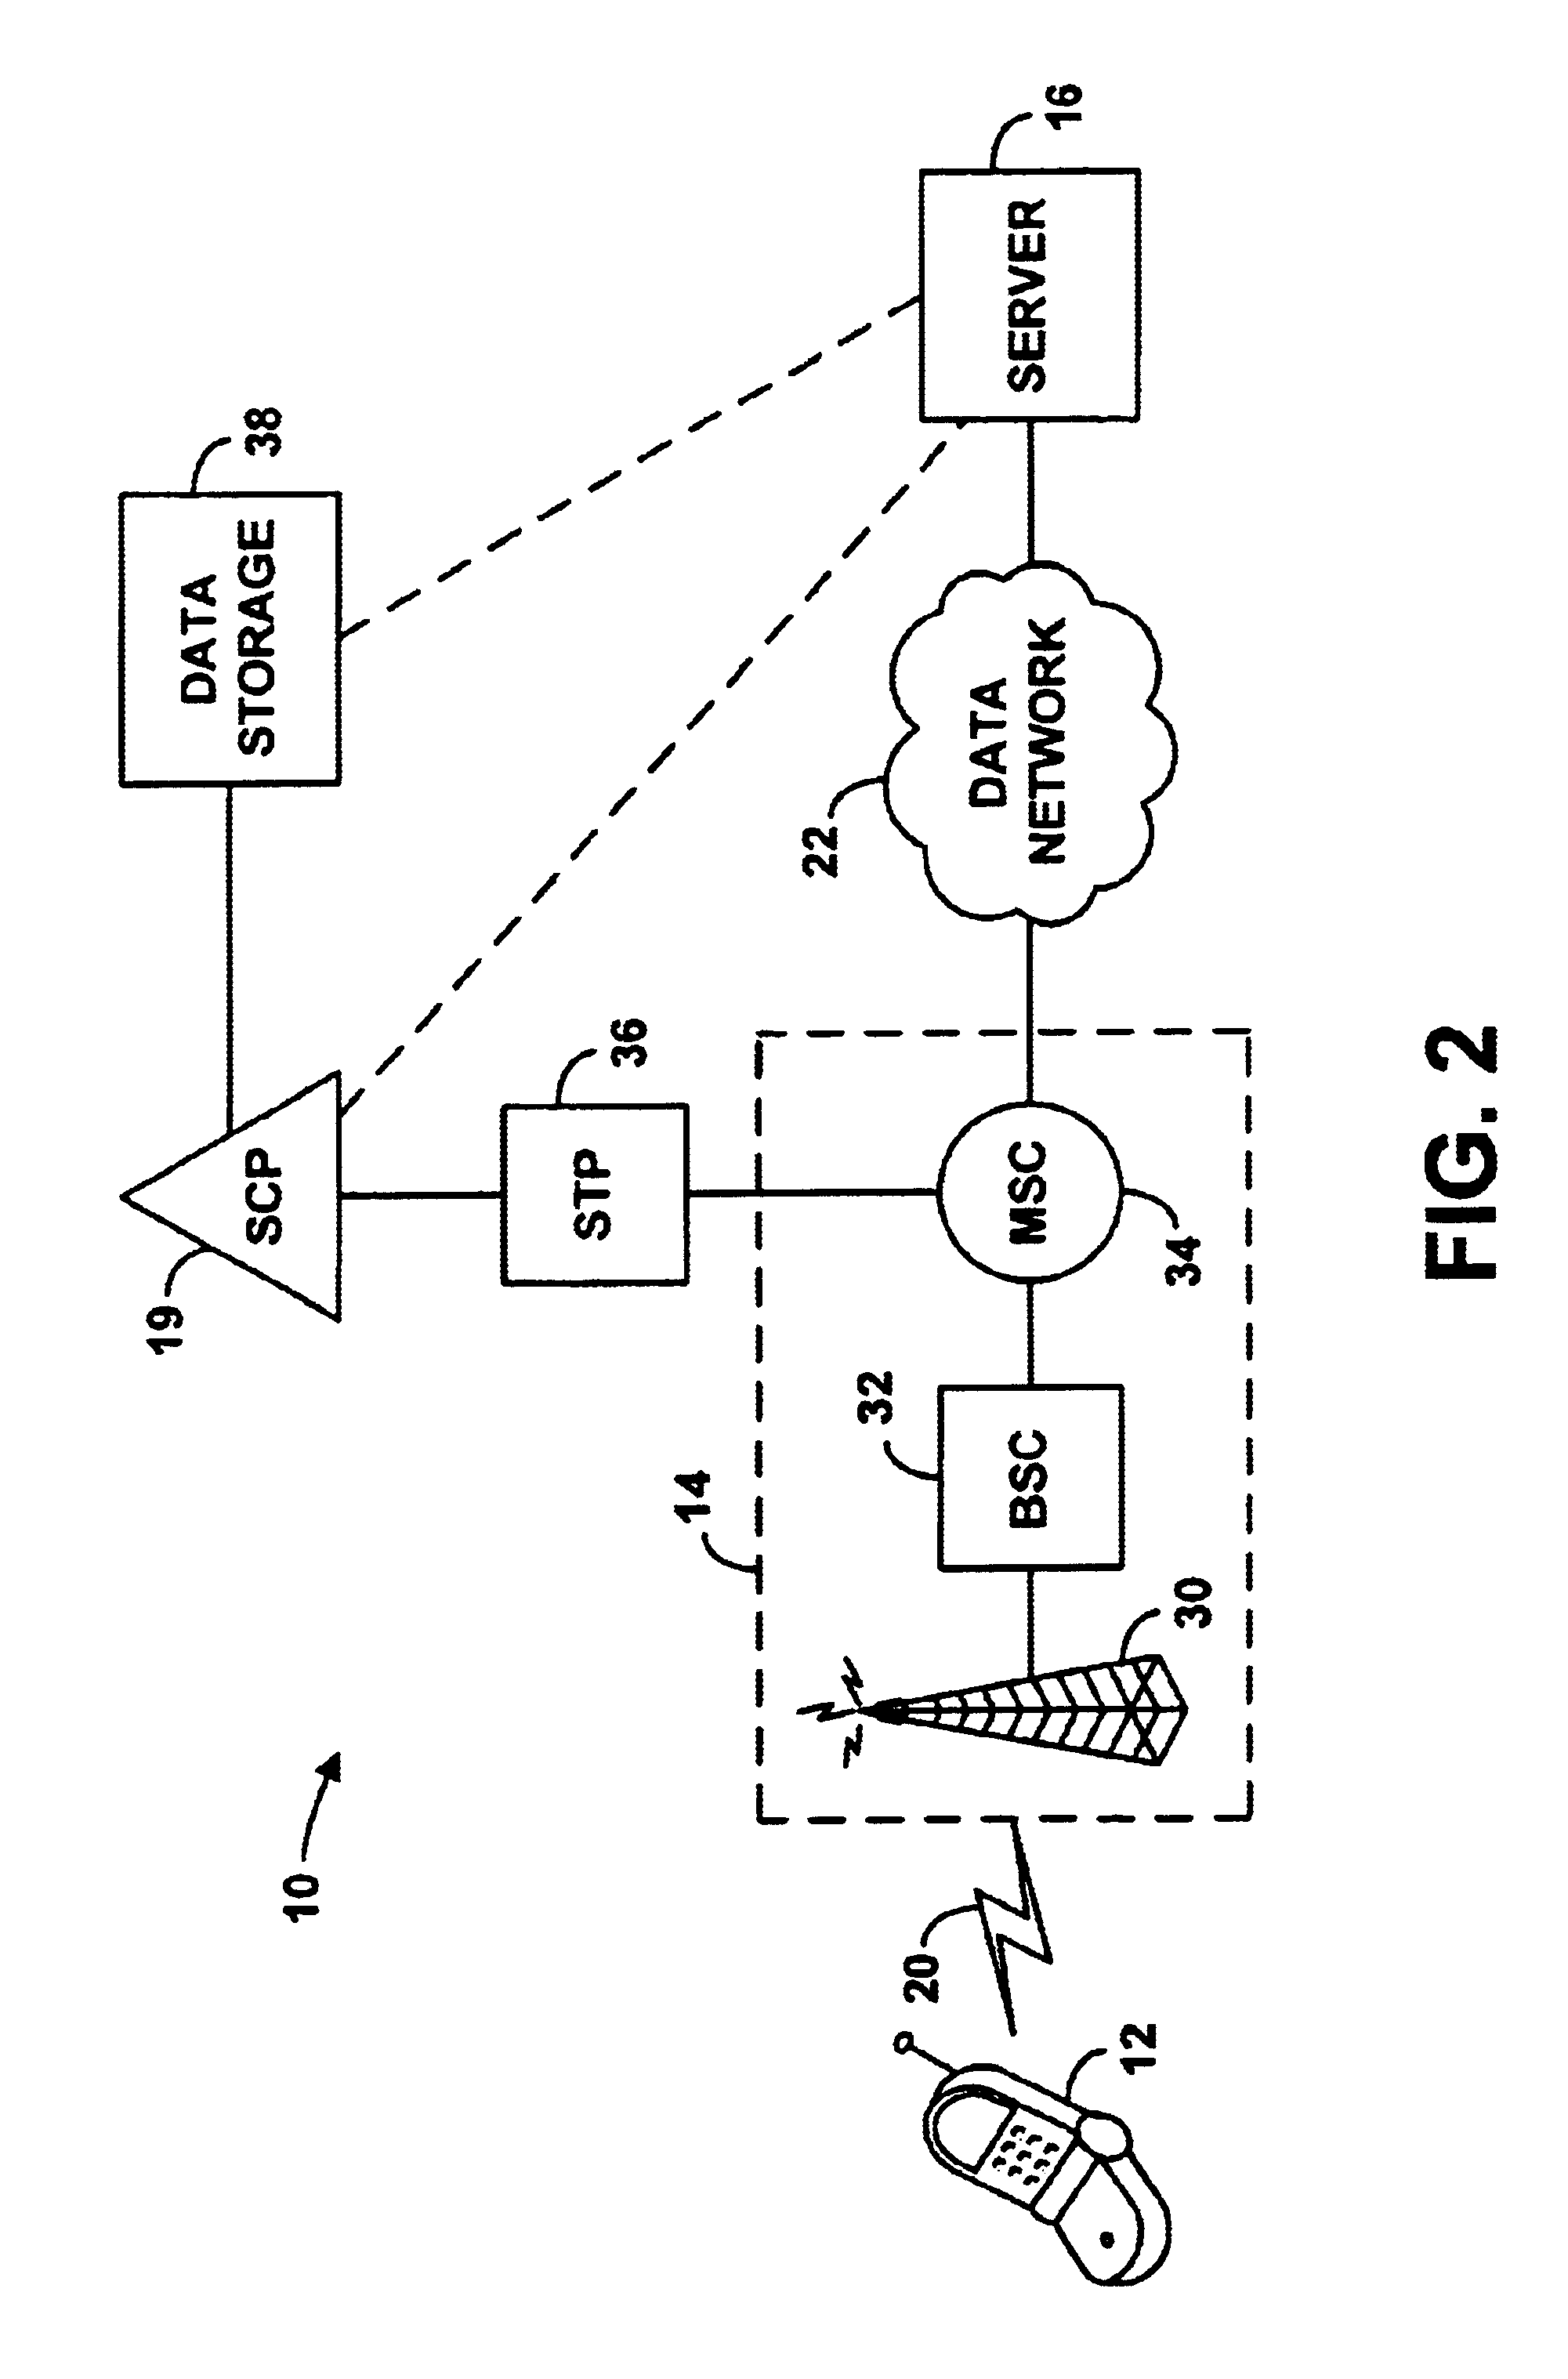 Method and system for facilitating location-based services